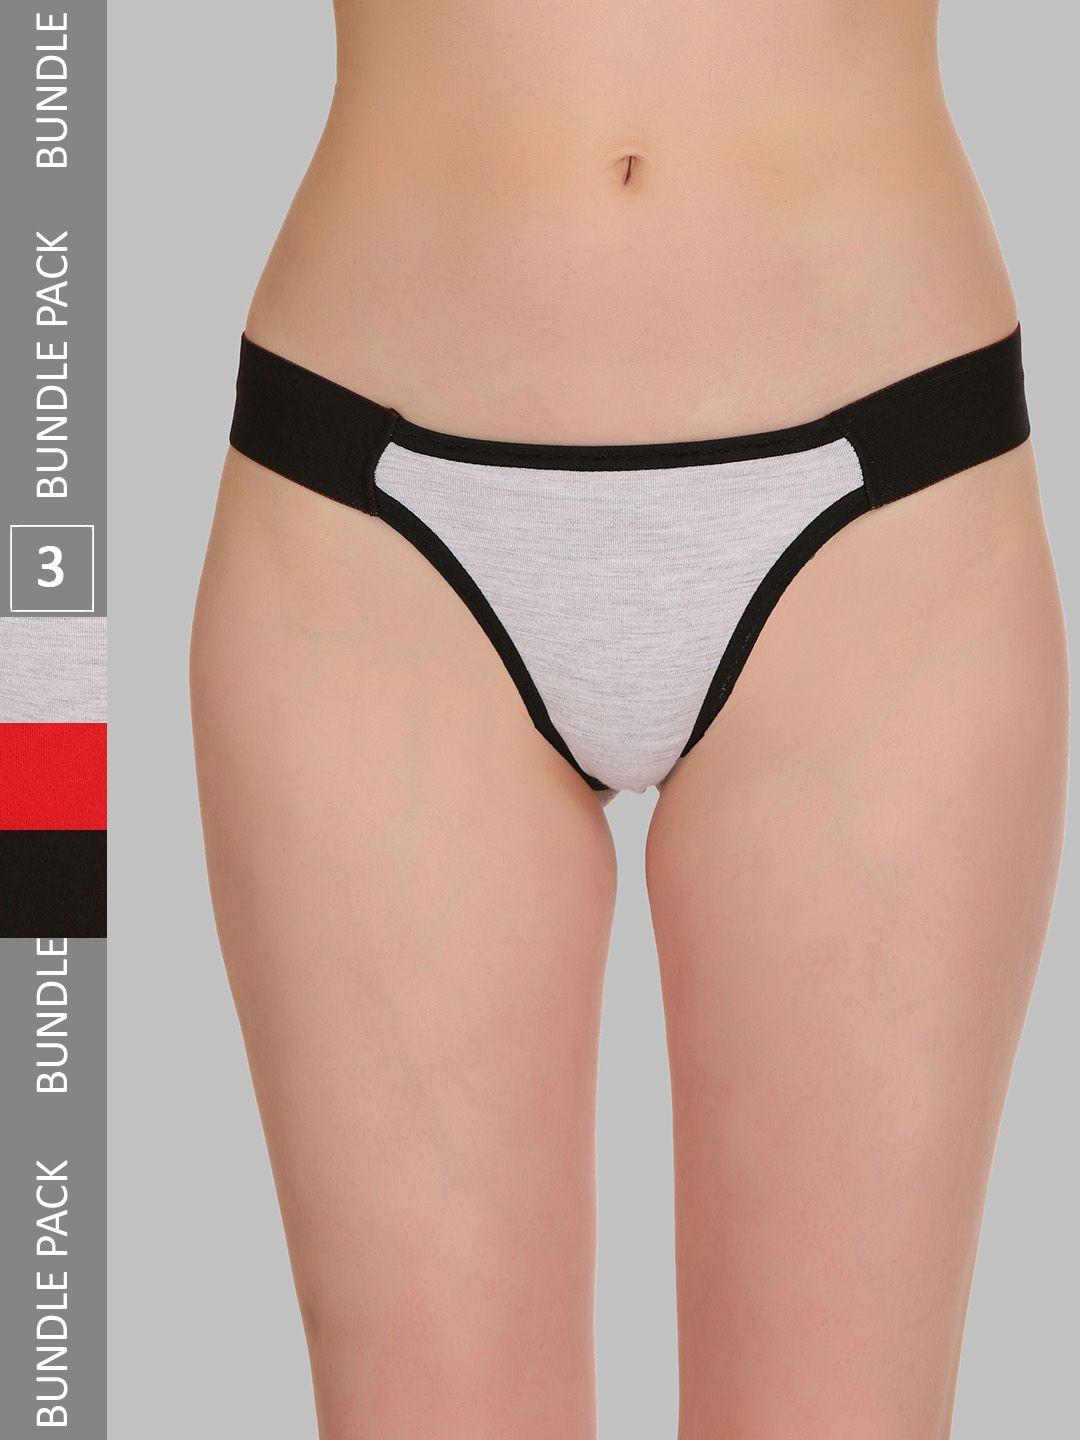 selfcare-pack-of-3-colourblocked-thong-briefs-sn1545n